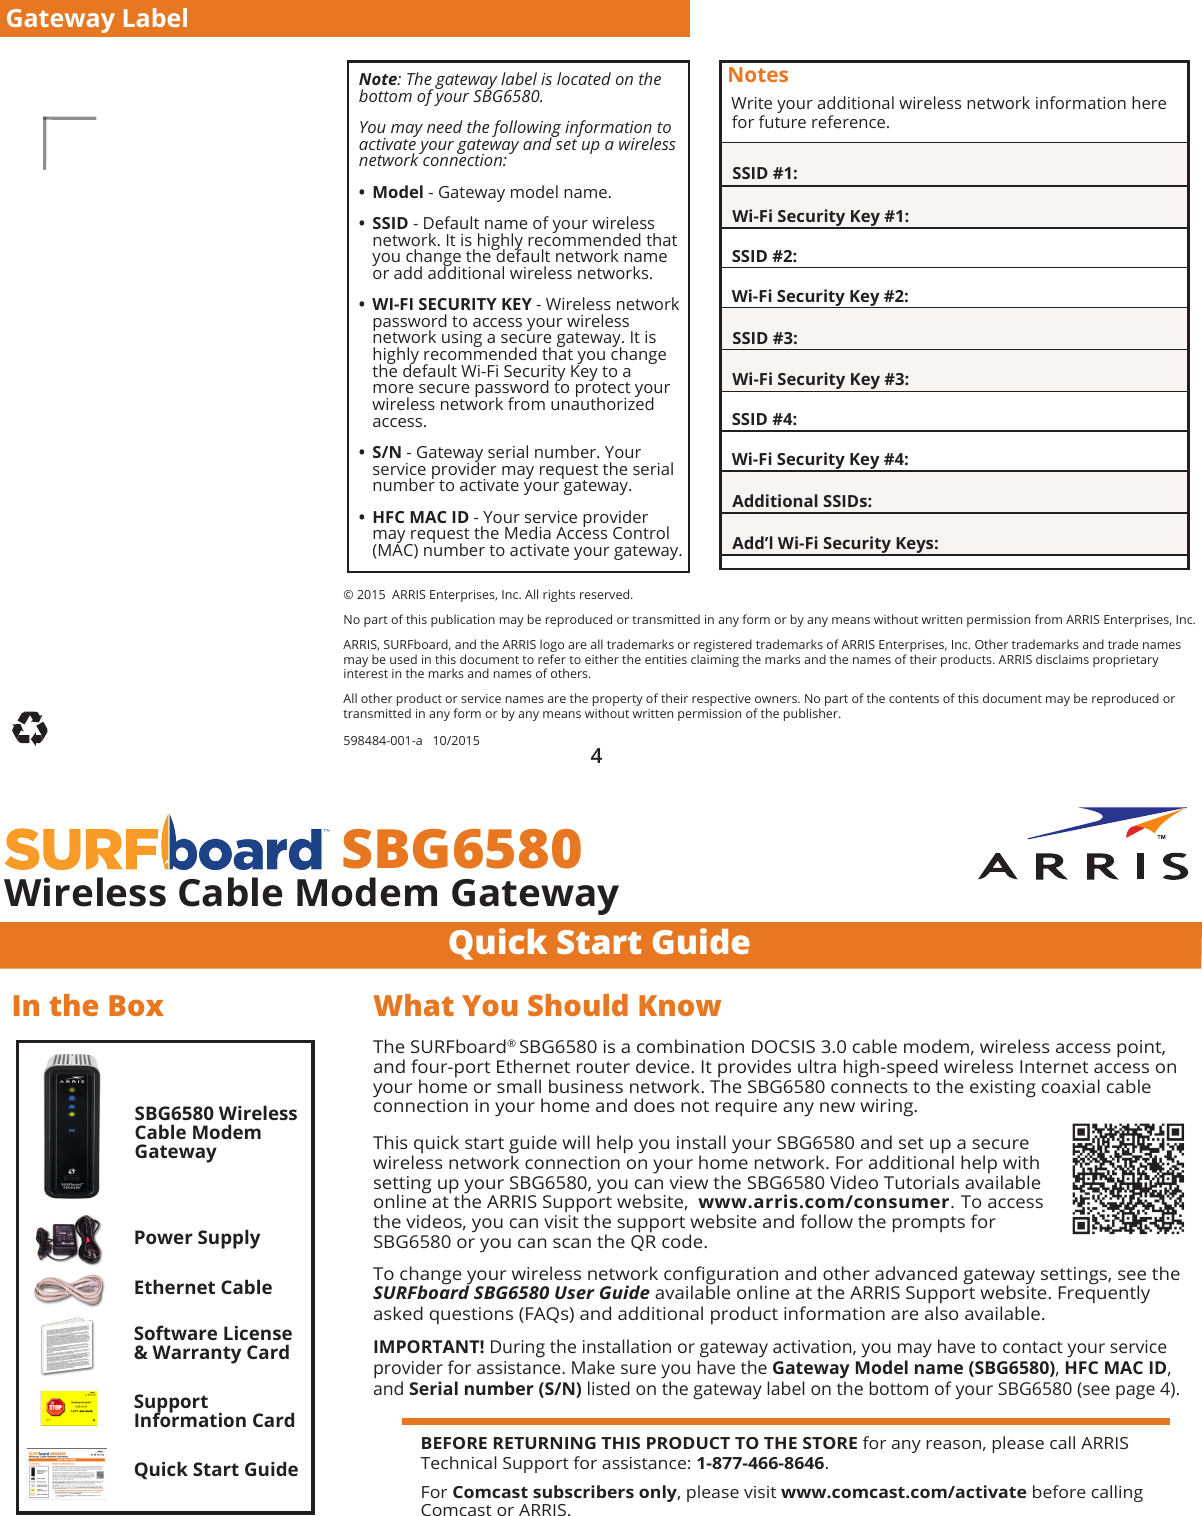 Quick Start Guide  SBG6580Wireless Cable Modem GatewayIn the BoxSBG6580 Wireless Cable Modem GatewayPower SupplyEthernet CableSoftware License &amp; Warranty CardQuick Start GuideThe SURFboard® SBG6580 is a combination DOCSIS 3.0 cable modem, wireless access point, and four-port Ethernet router device. It provides ultra high-speed wireless Internet access on your home or small business network. The SBG6580 connects to the existing coaxial cable connection in your home and does not require any new wiring.This quick start guide will help you install your SBG6580 and set up a secure wireless network connection on your home network. For additional help with setting up your SBG6580, you can view the SBG6580 Video Tutorials available  online at the ARRIS Support website,  www.arris.com/consumer. To access  the videos, you can visit the support website and follow the prompts for  SBG6580 or you can scan the QR code. To change your wireless network conguration and other advanced gateway settings, see the SURFboard SBG6580 User Guide available online at the ARRIS Support website. Frequently asked questions (FAQs) and additional product information are also available. IMPORTANT! During the installation or gateway activation, you may have to contact your service provider for assistance. Make sure you have the Gateway Model name (SBG6580), HFC MAC ID, and Serial number (S/N) listed on the gateway label on the bottom of your SBG6580 (see page 4).What You Should Know© 2015  ARRIS Enterprises, Inc. All rights reserved. No part of this publication may be reproduced or transmitted in any form or by any means without written permission from ARRIS Enterprises, Inc. ARRIS, SURFboard, and the ARRIS logo are all trademarks or registered trademarks of ARRIS Enterprises, Inc. Other trademarks and trade names may be used in this document to refer to either the entities claiming the marks and the names of their products. ARRIS disclaims proprietary interest in the marks and names of others.  All other product or service names are the property of their respective owners. No part of the contents of this document may be reproduced or transmitted in any form or by any means without written permission of the publisher. 598484-001-a   10/2015 Note: The gateway label is located on the bottom of your SBG6580. You may need the following information to activate your gateway and set up a wireless network connection: • Model - Gateway model name. • SSID - Default name of your wireless network. It is highly recommended that you change the default network name or add additional wireless networks. • WI-FI SECURITY KEY - Wireless network password to access your wireless network using a secure gateway. It is highly recommended that you change the default Wi-Fi Security Key to a more secure password to protect your wireless network from unauthorized access. • S/N - Gateway serial number. Your service provider may request the serial number to activate your gateway. • HFC MAC ID - Your service provider may request the Media Access Control (MAC) number to activate your gateway.Notes Write your additional wireless network information here  for future reference.  SSID #1:  Wi-Fi Security Key #1:  SSID #2:  Wi-Fi Security Key #2:  SSID #3:  Wi-Fi Security Key #3:  SSID #4:  Wi-Fi Security Key #4:  Additional SSIDs:  Add’l Wi-Fi Security Keys:4Gateway LabelBEFORE RETURNING THIS PRODUCT TO THE STORE for any reason, please call ARRIS Technical Support for assistance: 1-877-466-8646.For Comcast subscribers only, please visit www.comcast.com/activate before calling Comcast or ARRIS.Support  Information Card